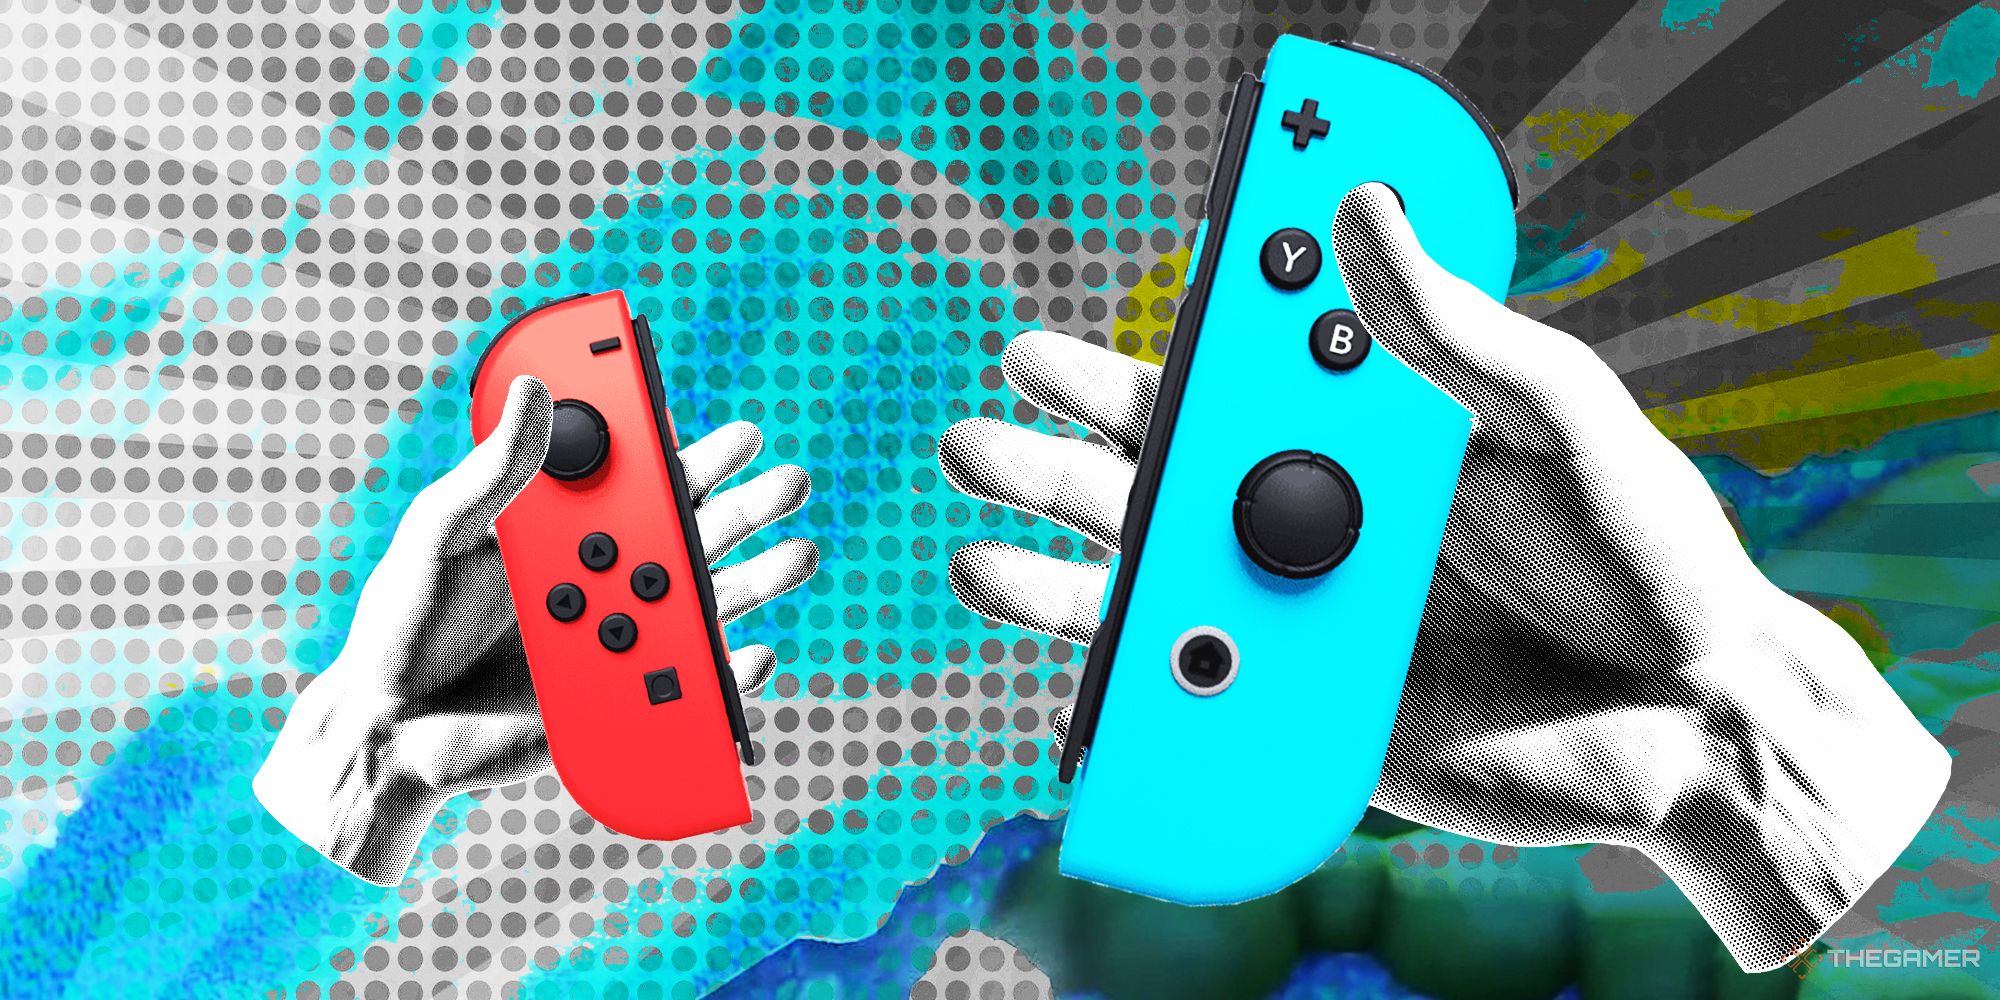 NEWS Nintendo Switch joy-cons held in two hand cut outts over a Super Mario Bros Wonder halftone background